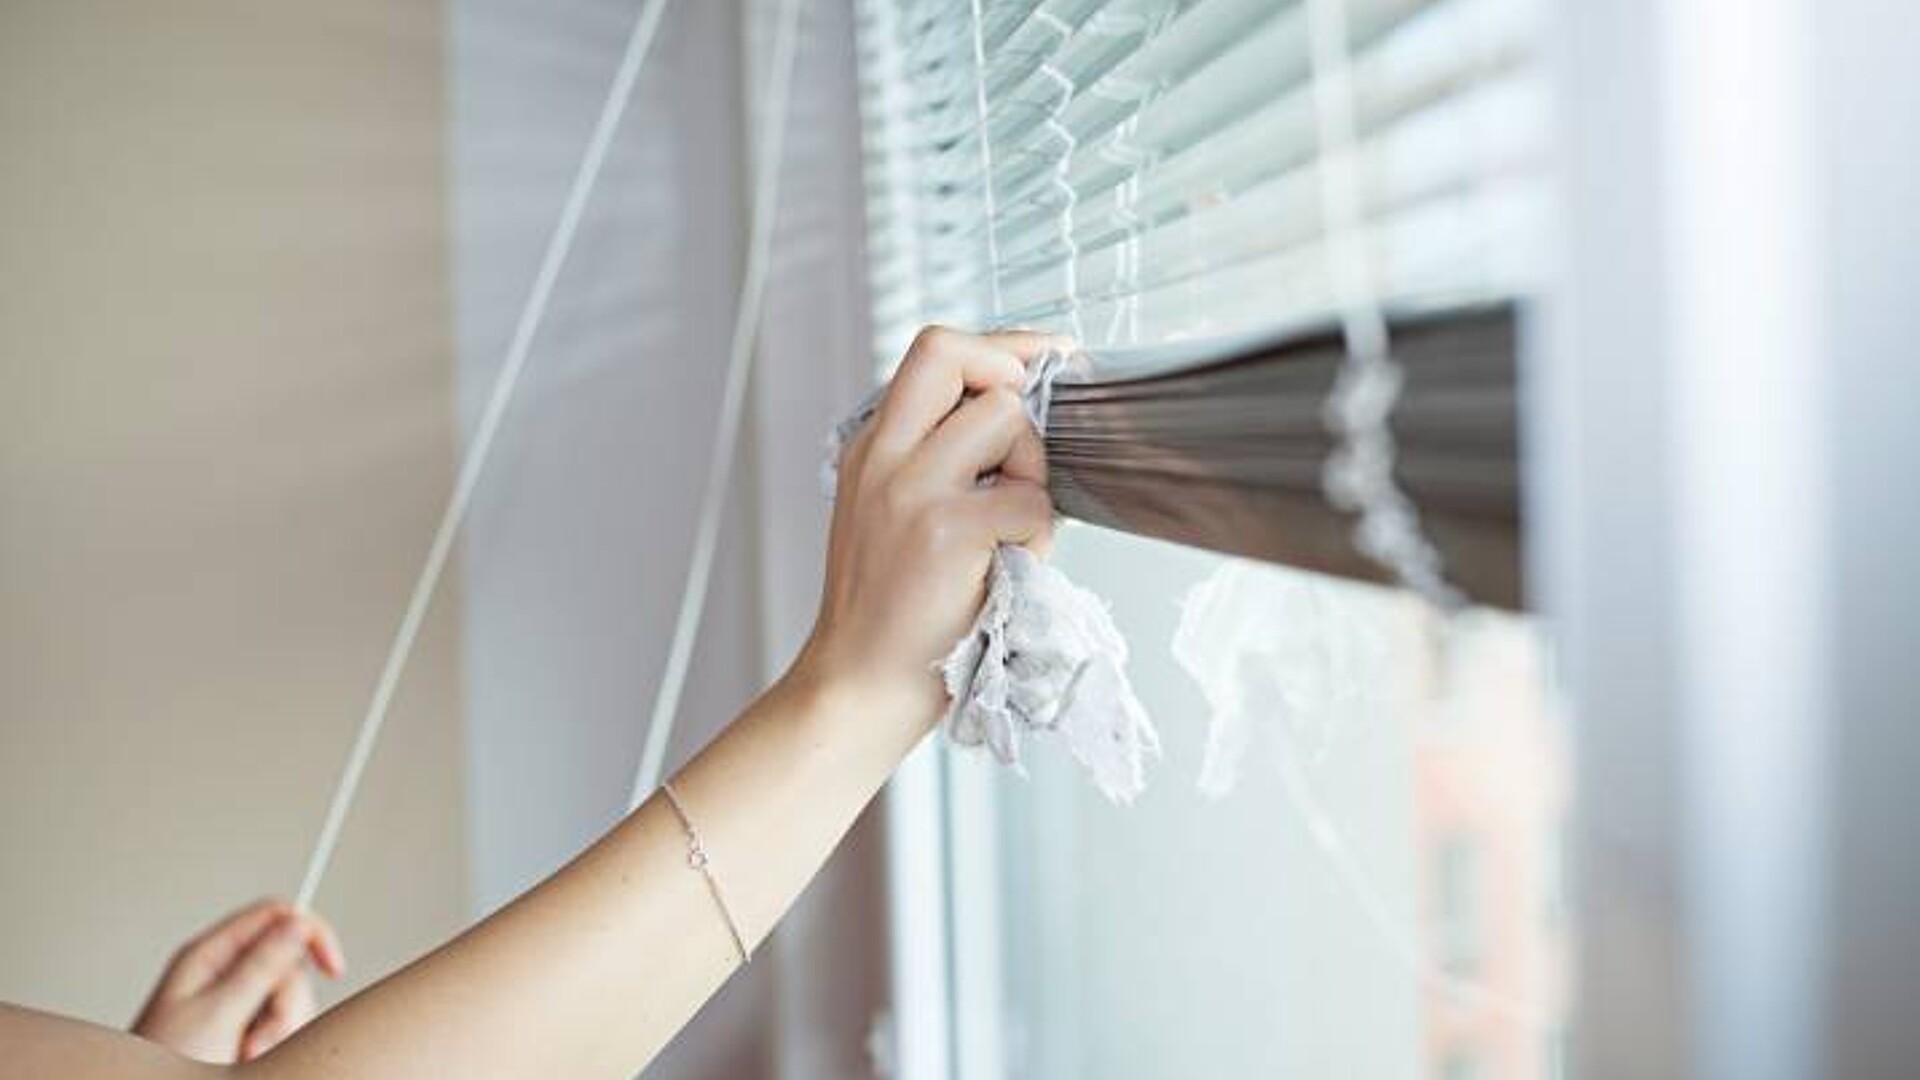 How to Properly Clean Aluminum Blinds